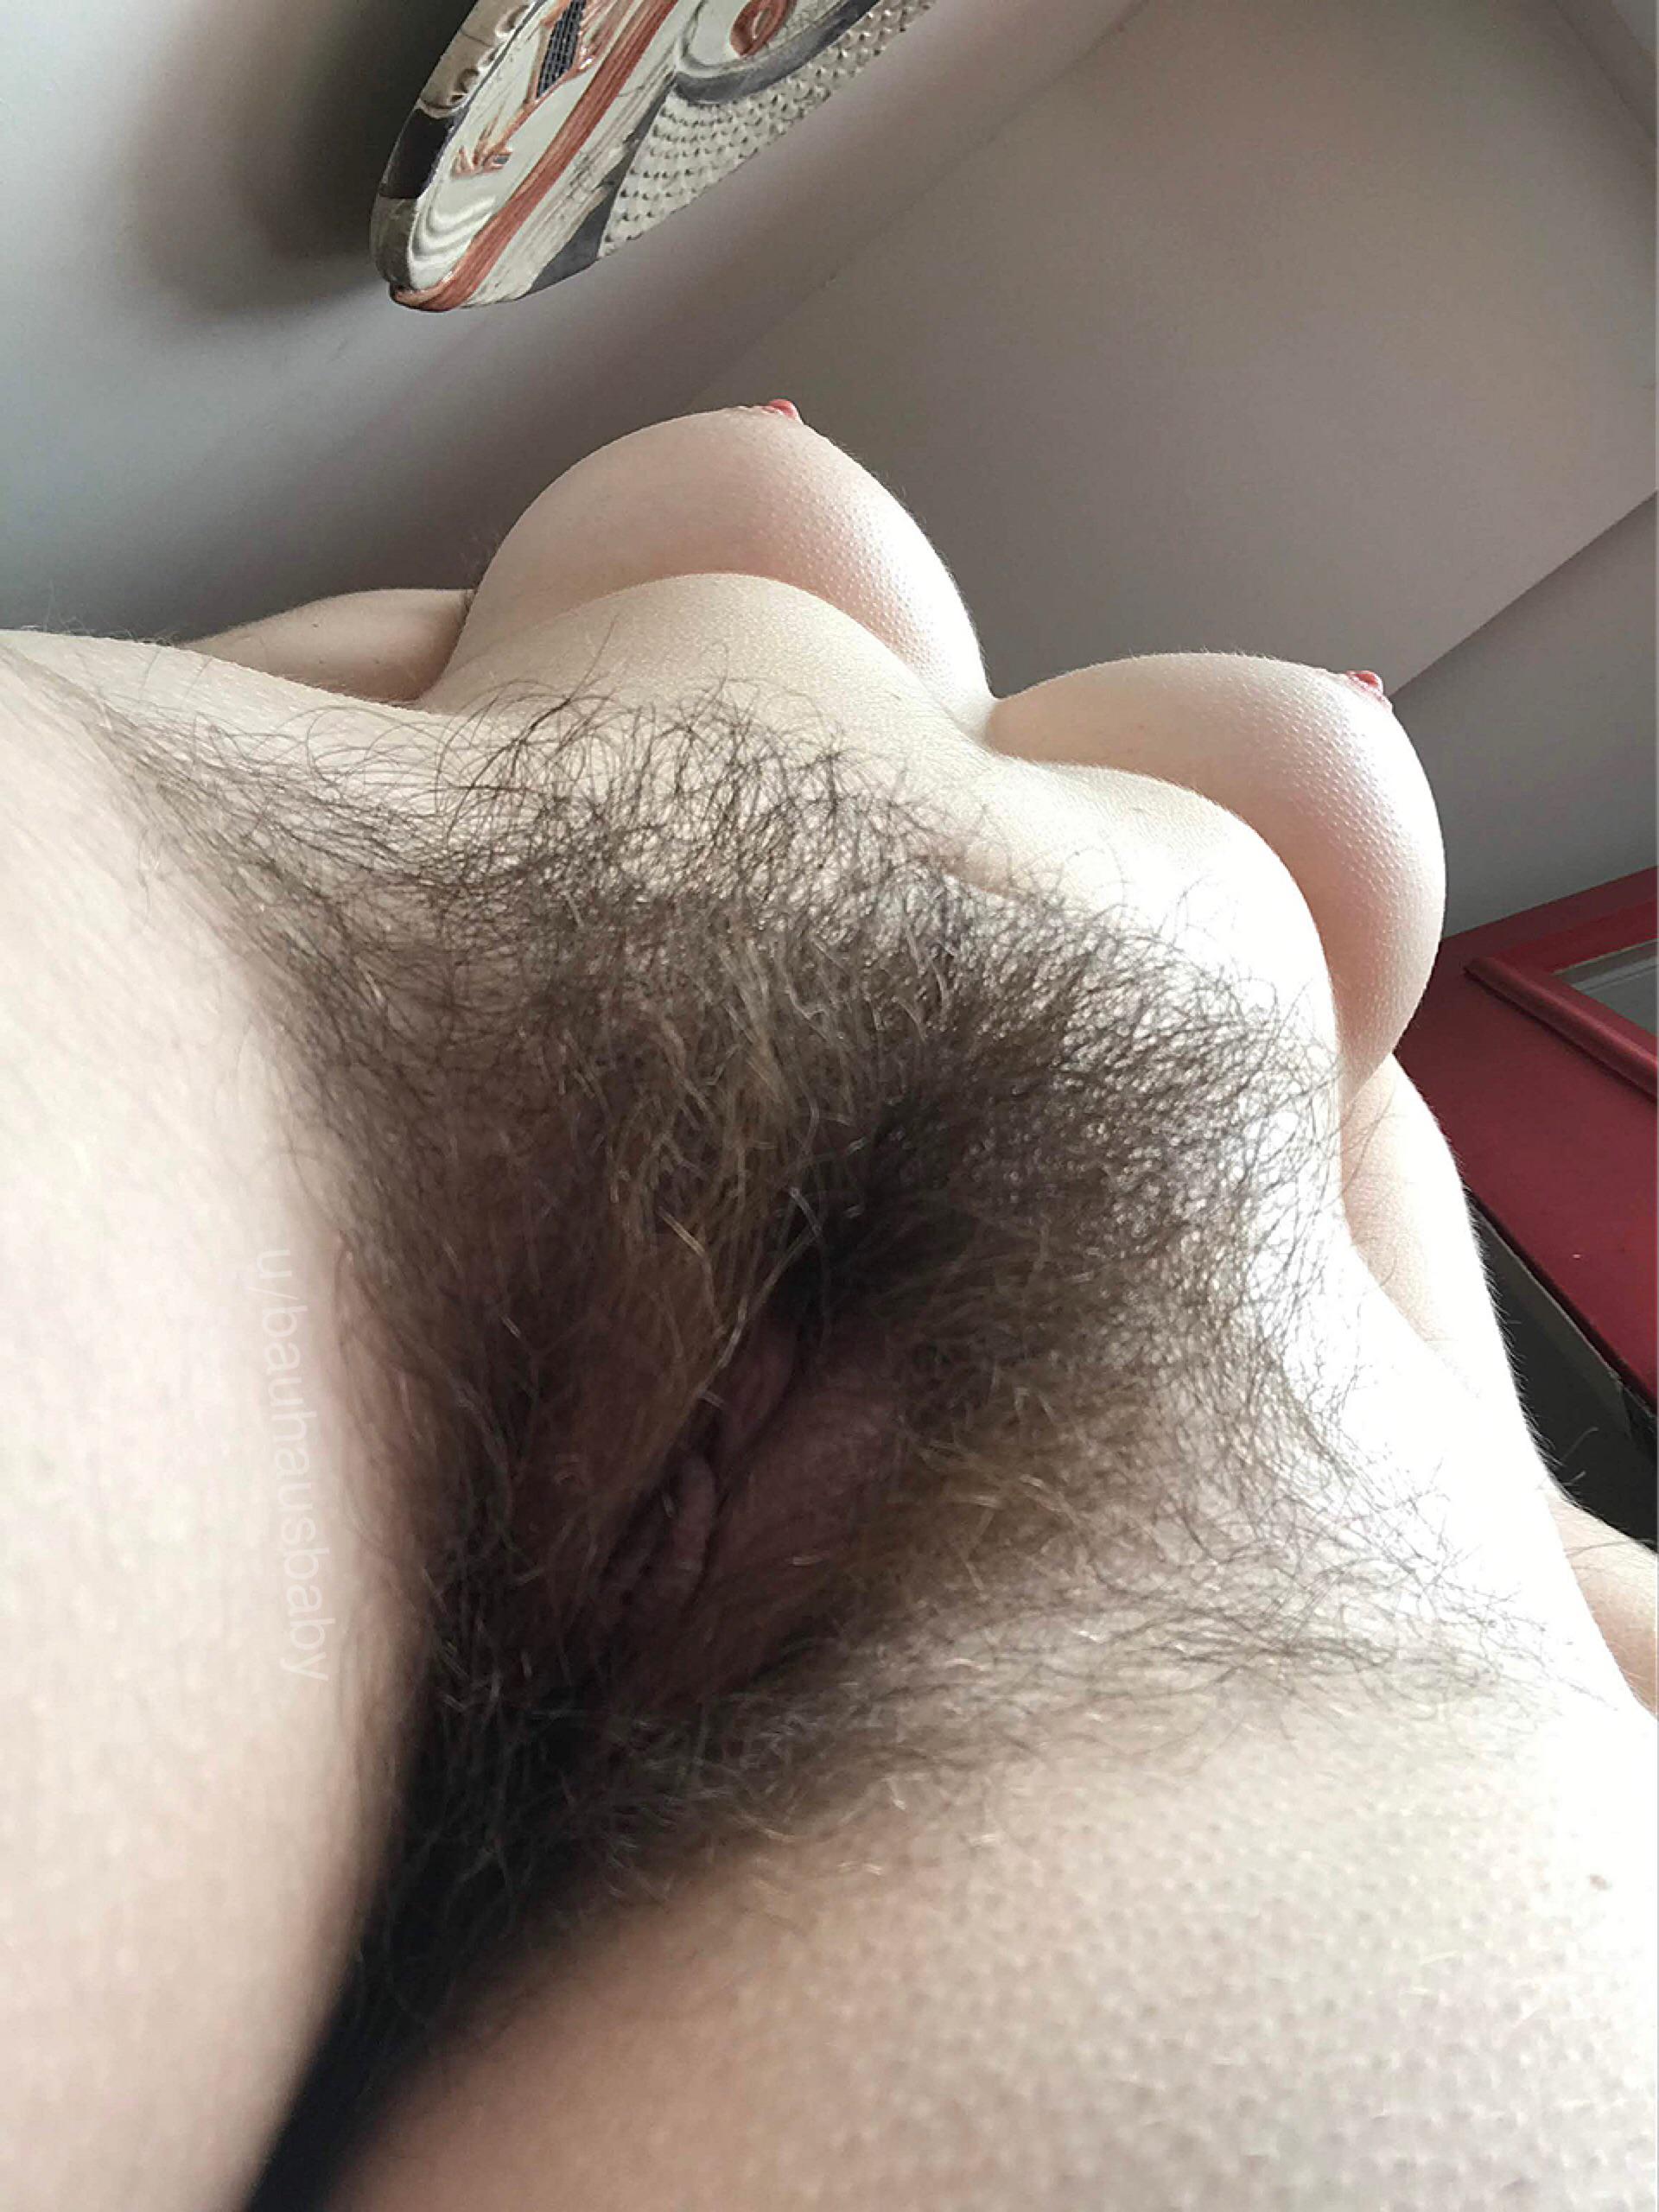 Hairy Pov Porn - POV standing over you with my hairy little pussy